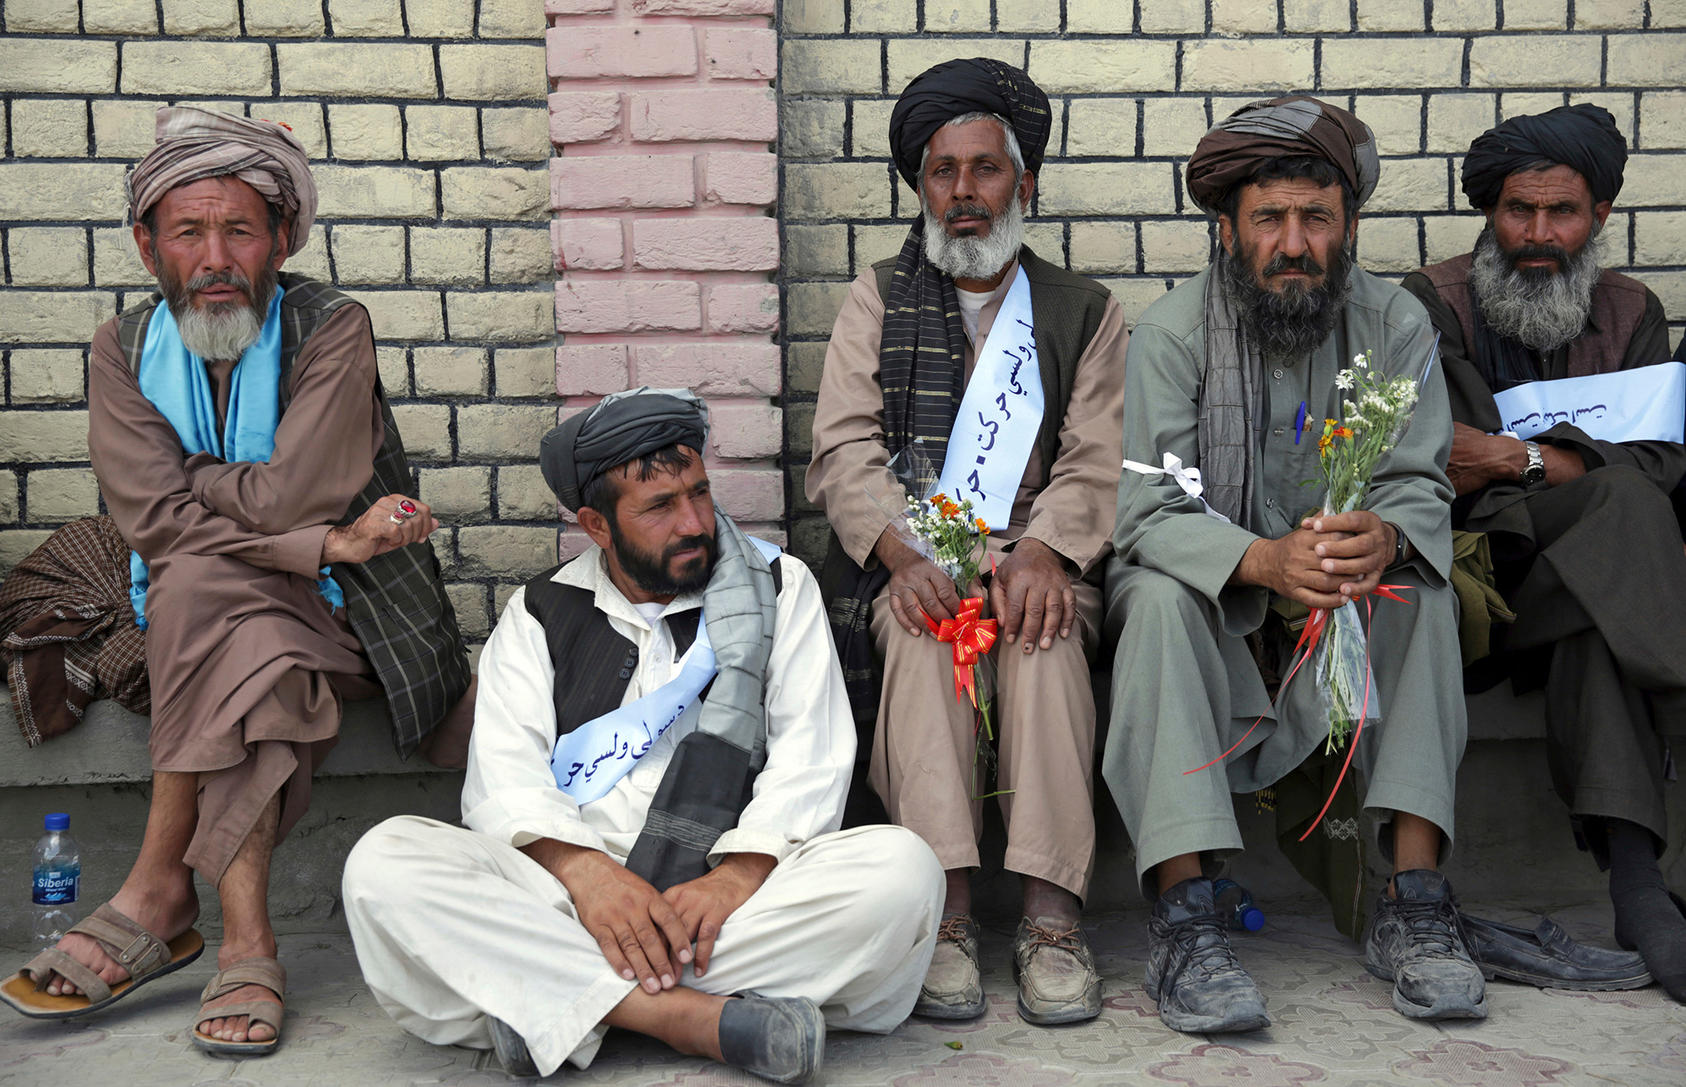 Members of the Helmand Peace Convoy rest in Kabul after marching more than three hundred miles from Lashkar Gah to protest the war. (Photo by Massoud Hossaini/ AP/ Shutterstock)